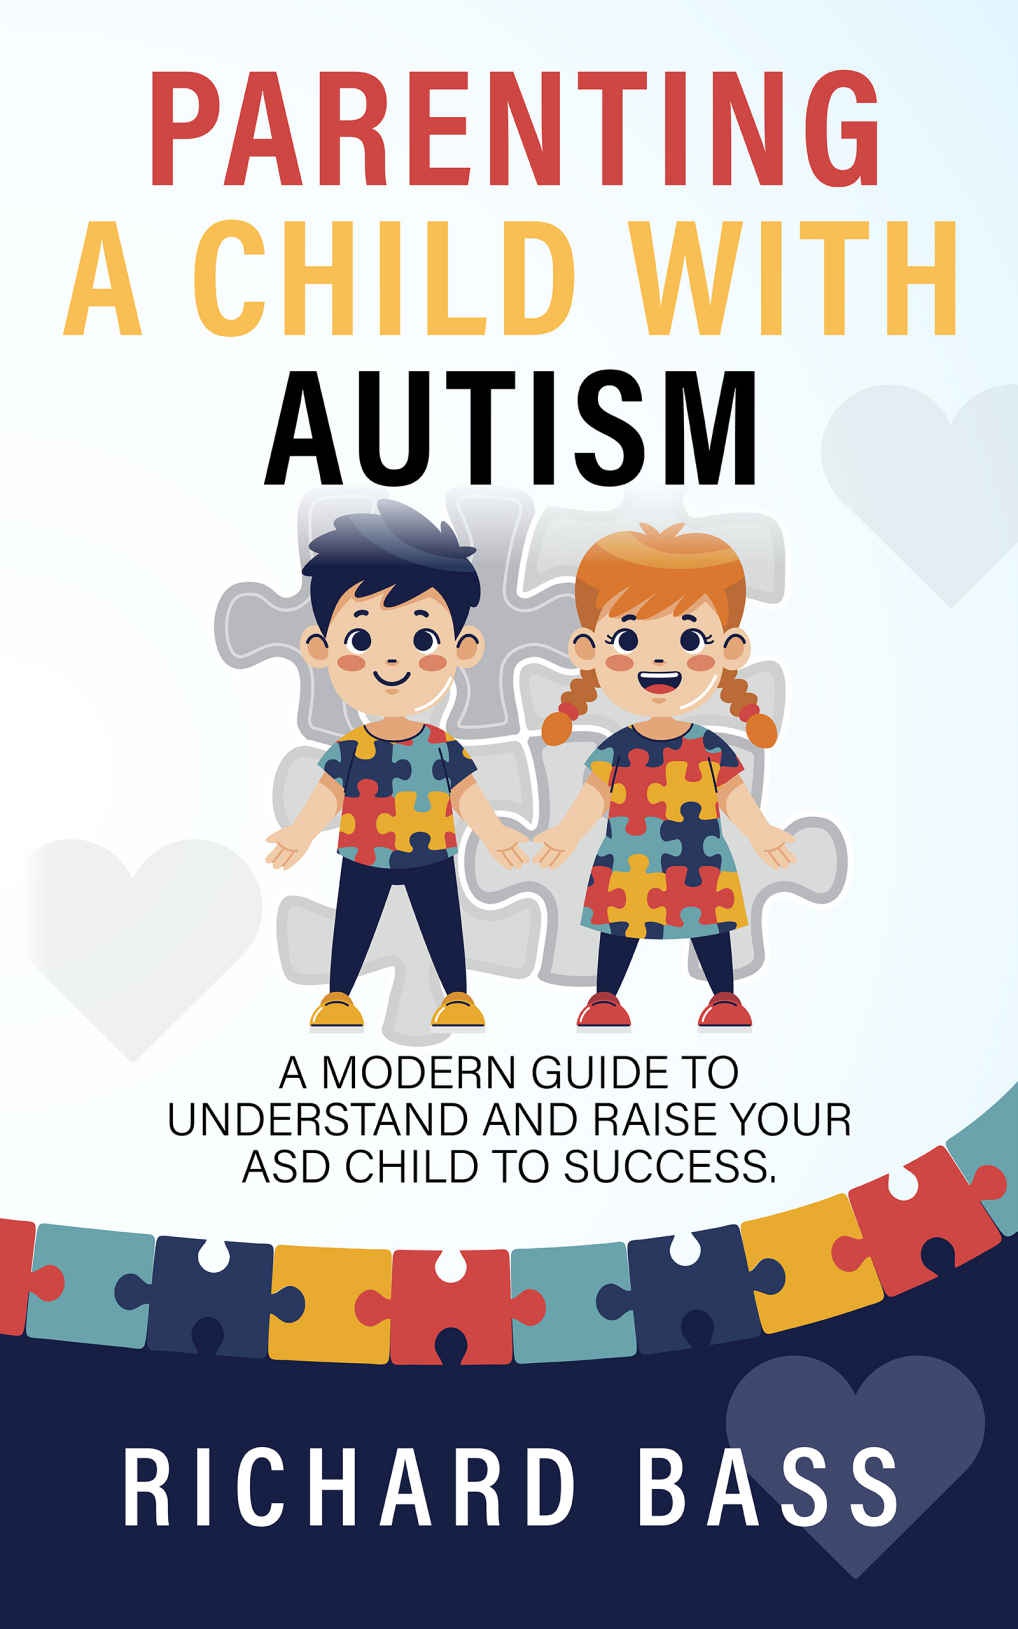 Parenting a Child with Autism: A Modern Guide to Understand and Raise your ASD Child to Success (Successful Parenting) - Epub + Converted PDF